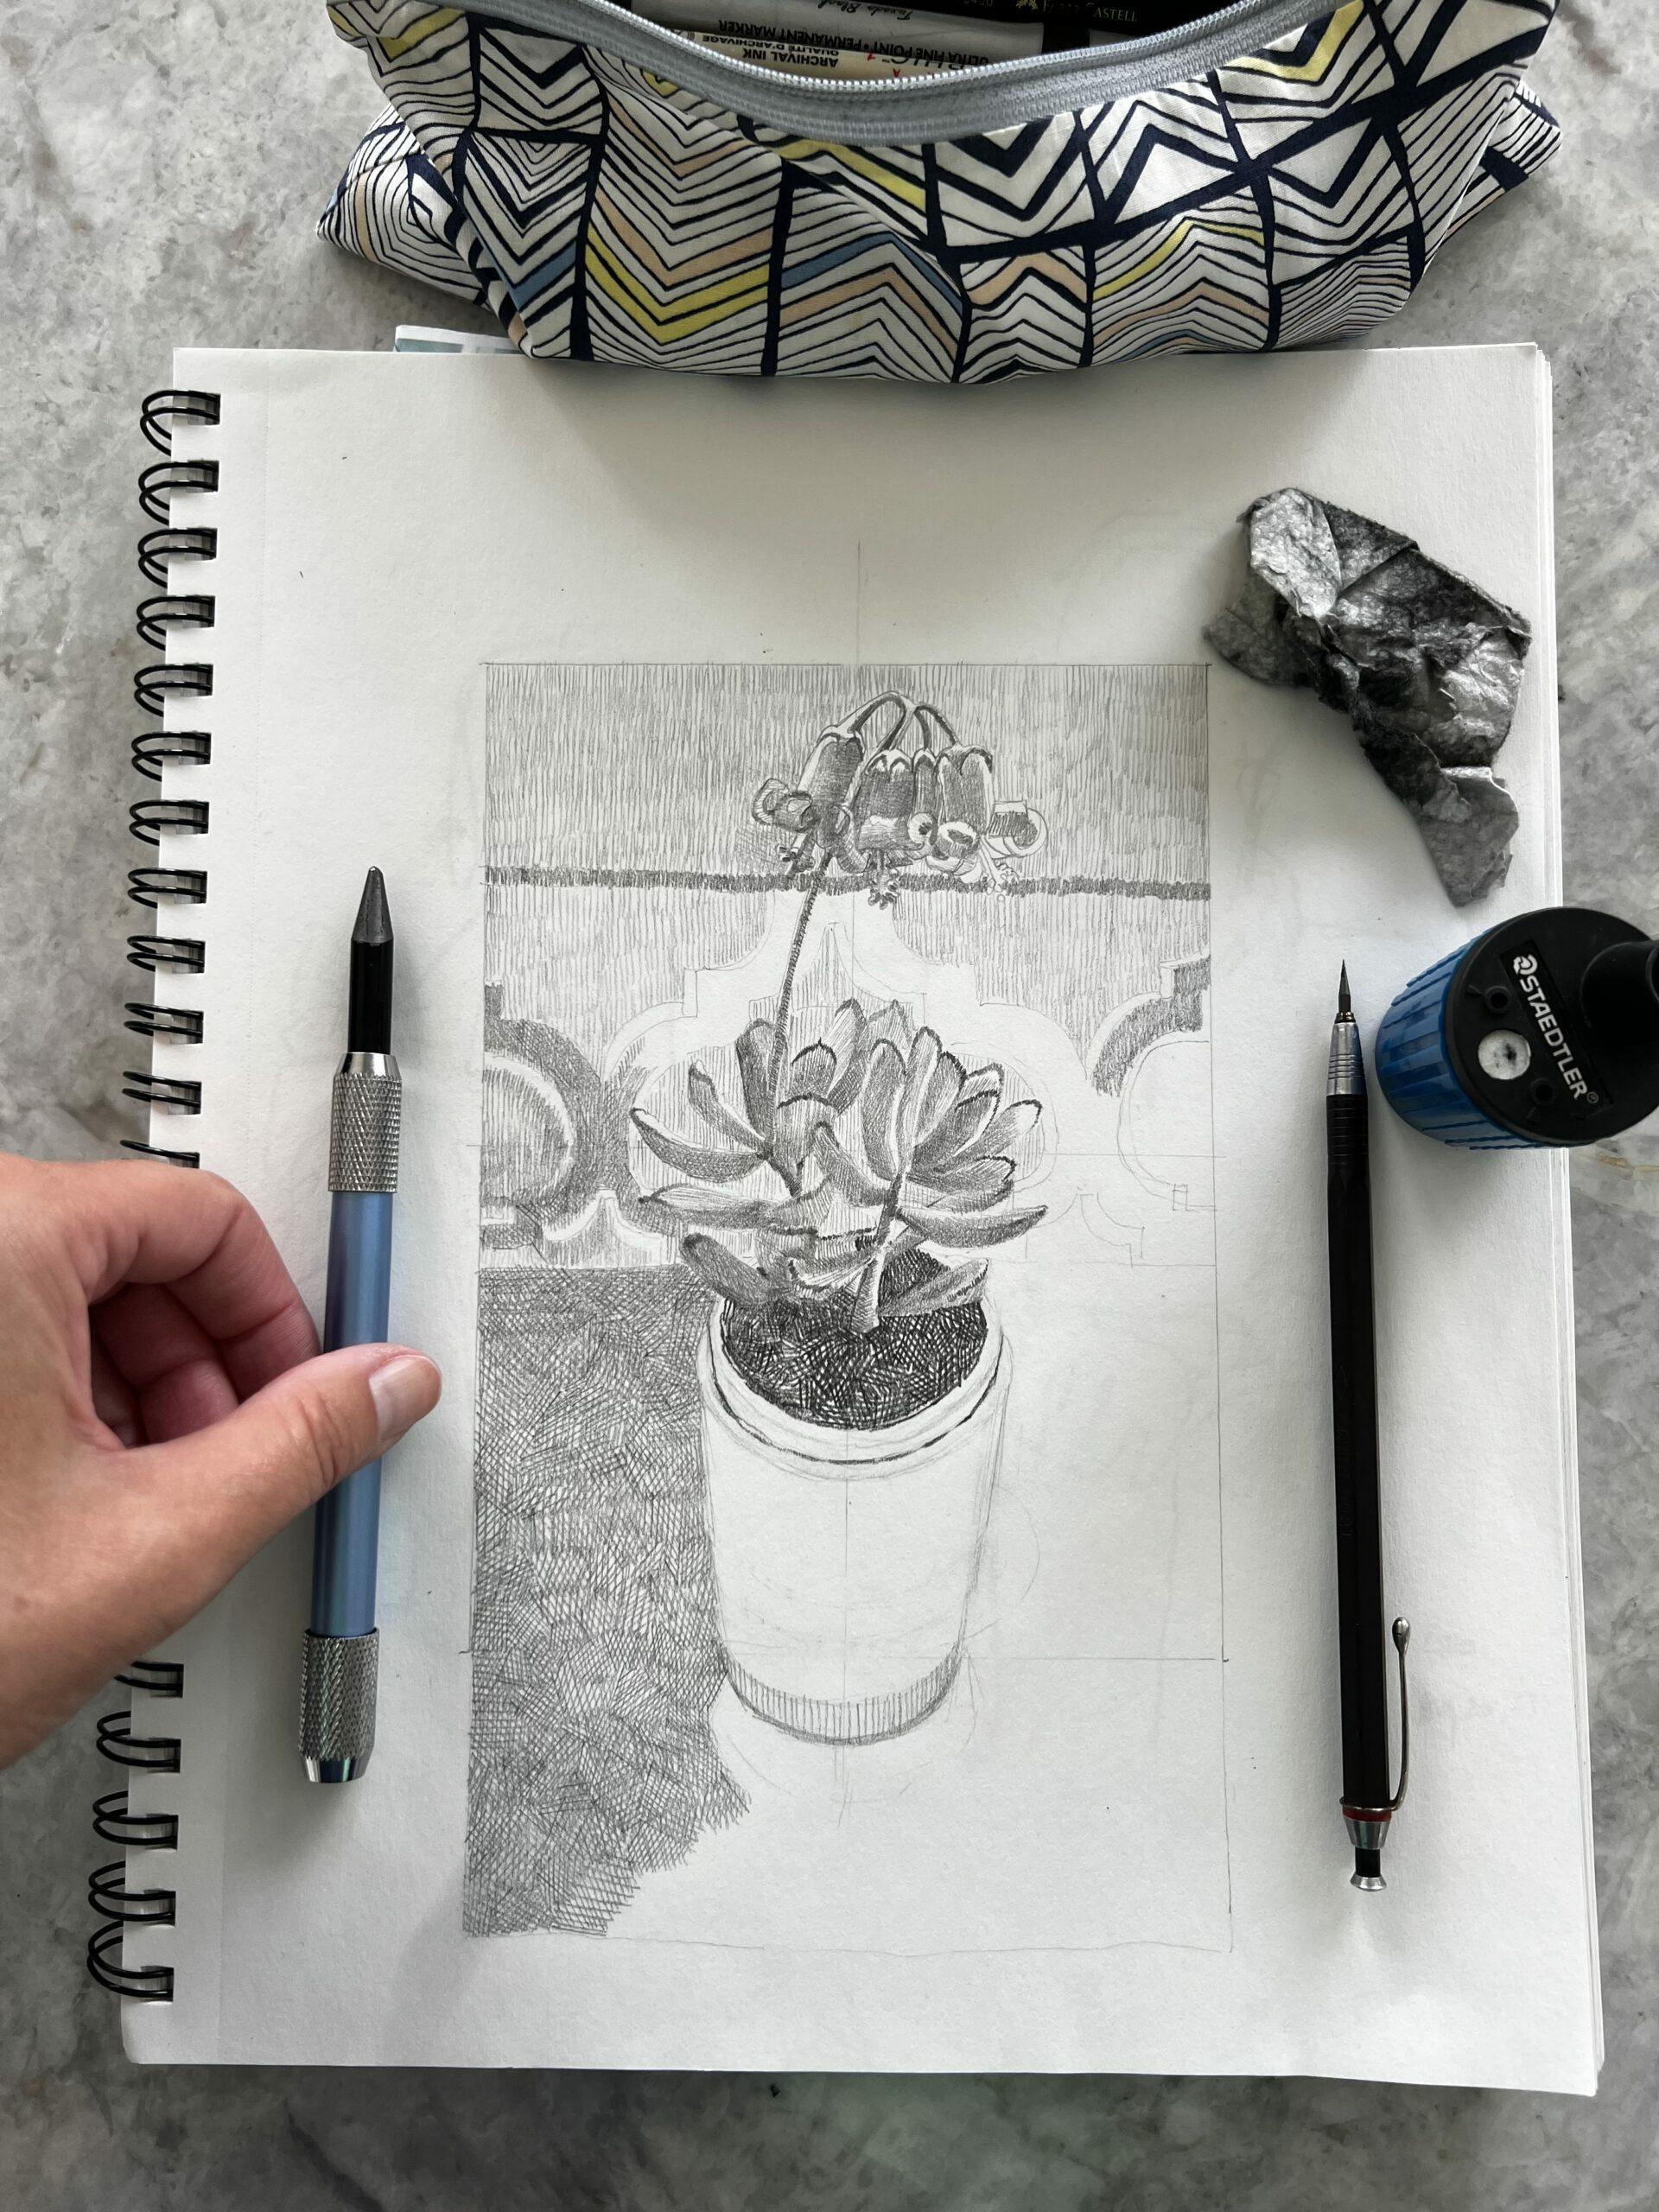 A sketchbook with a partially finished pencil drawing of a potted succulent and the drawing pencils used to create it